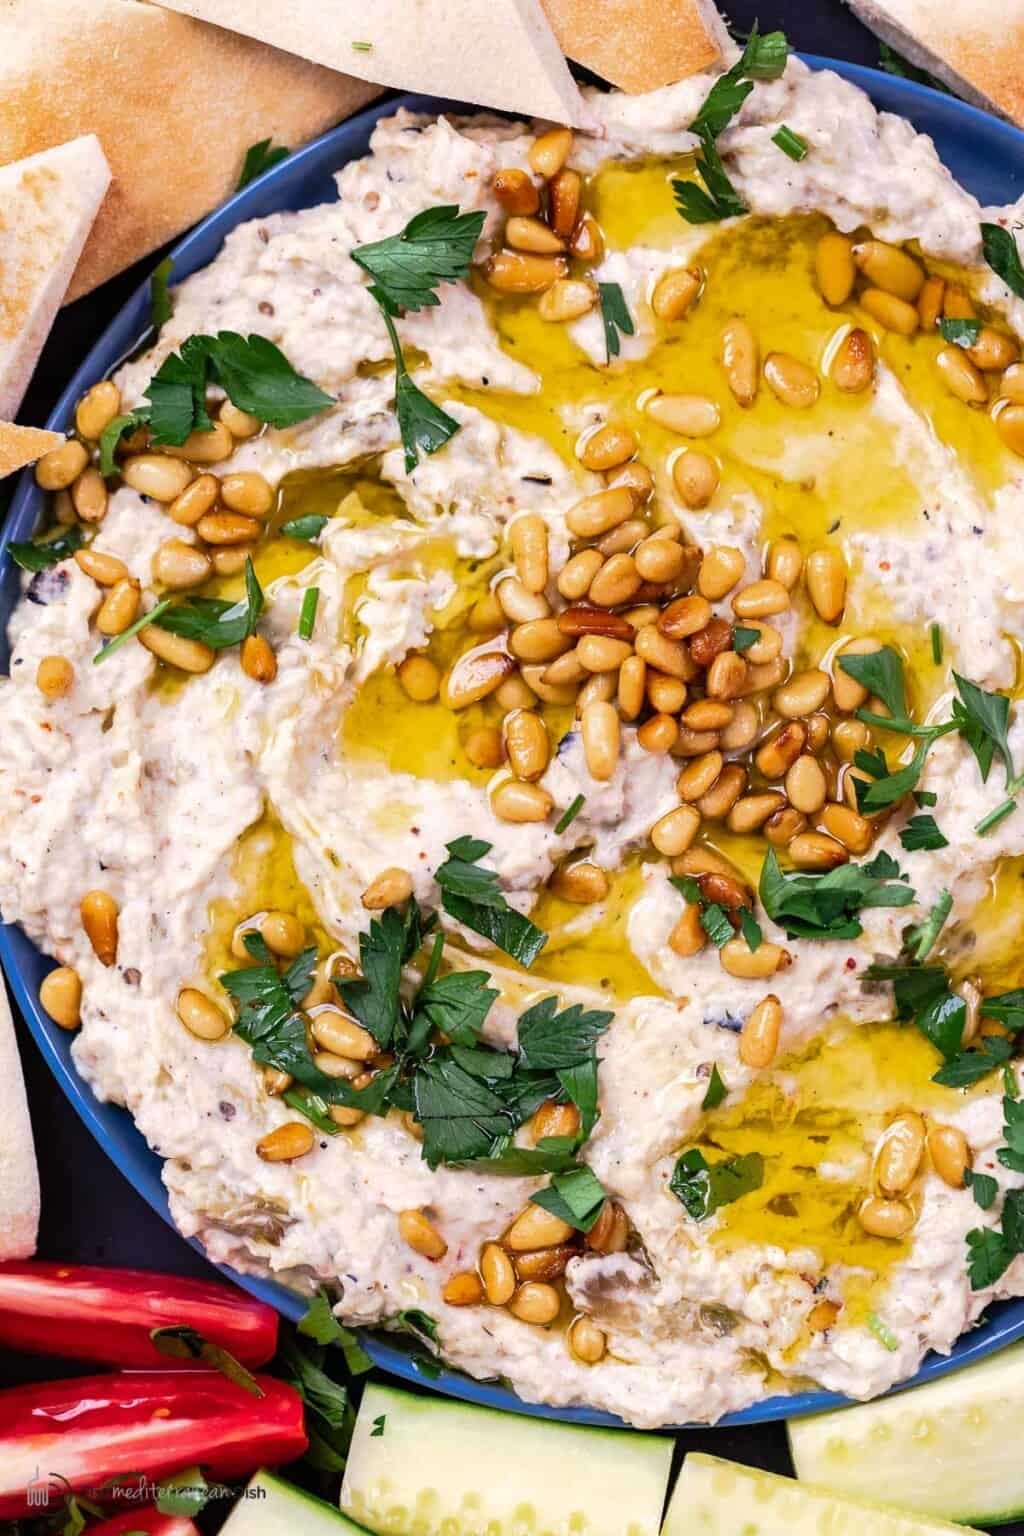 baba ganoush dip topped with olive oil, herbs, and pine nuts